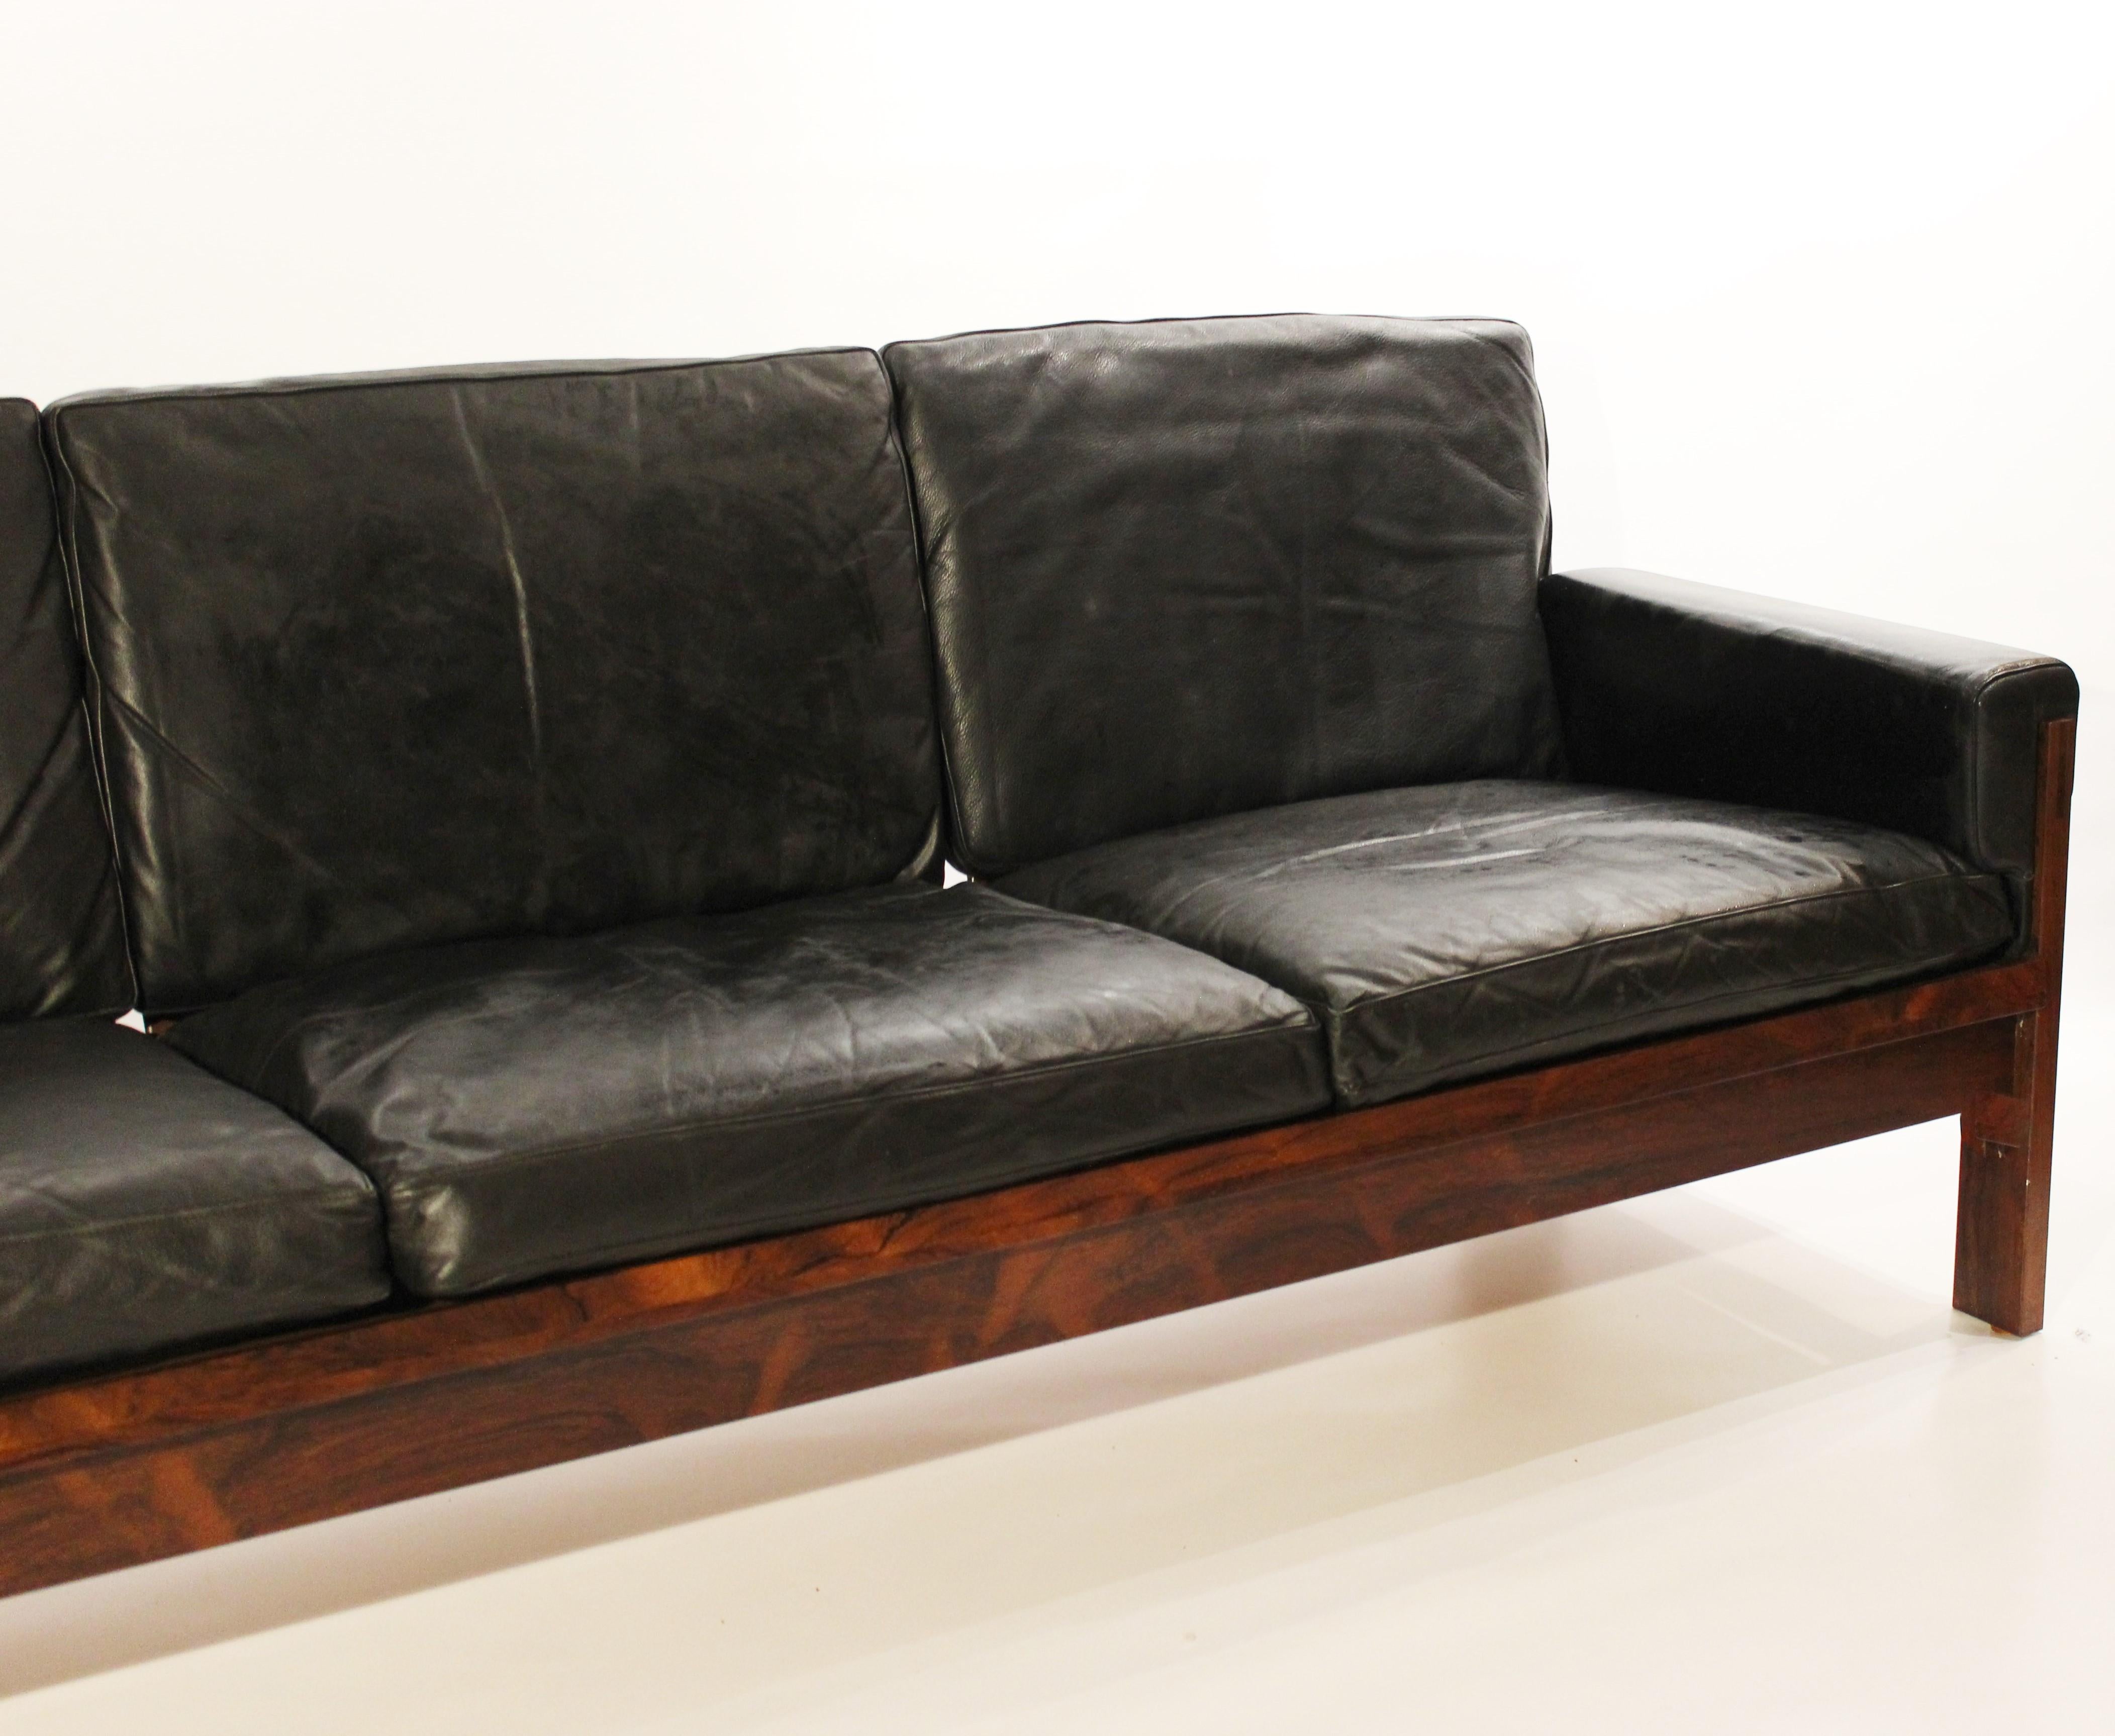 Sofa in rosewood and black leather of Danish design from the 1960s. The sofa is in great vintage condition.